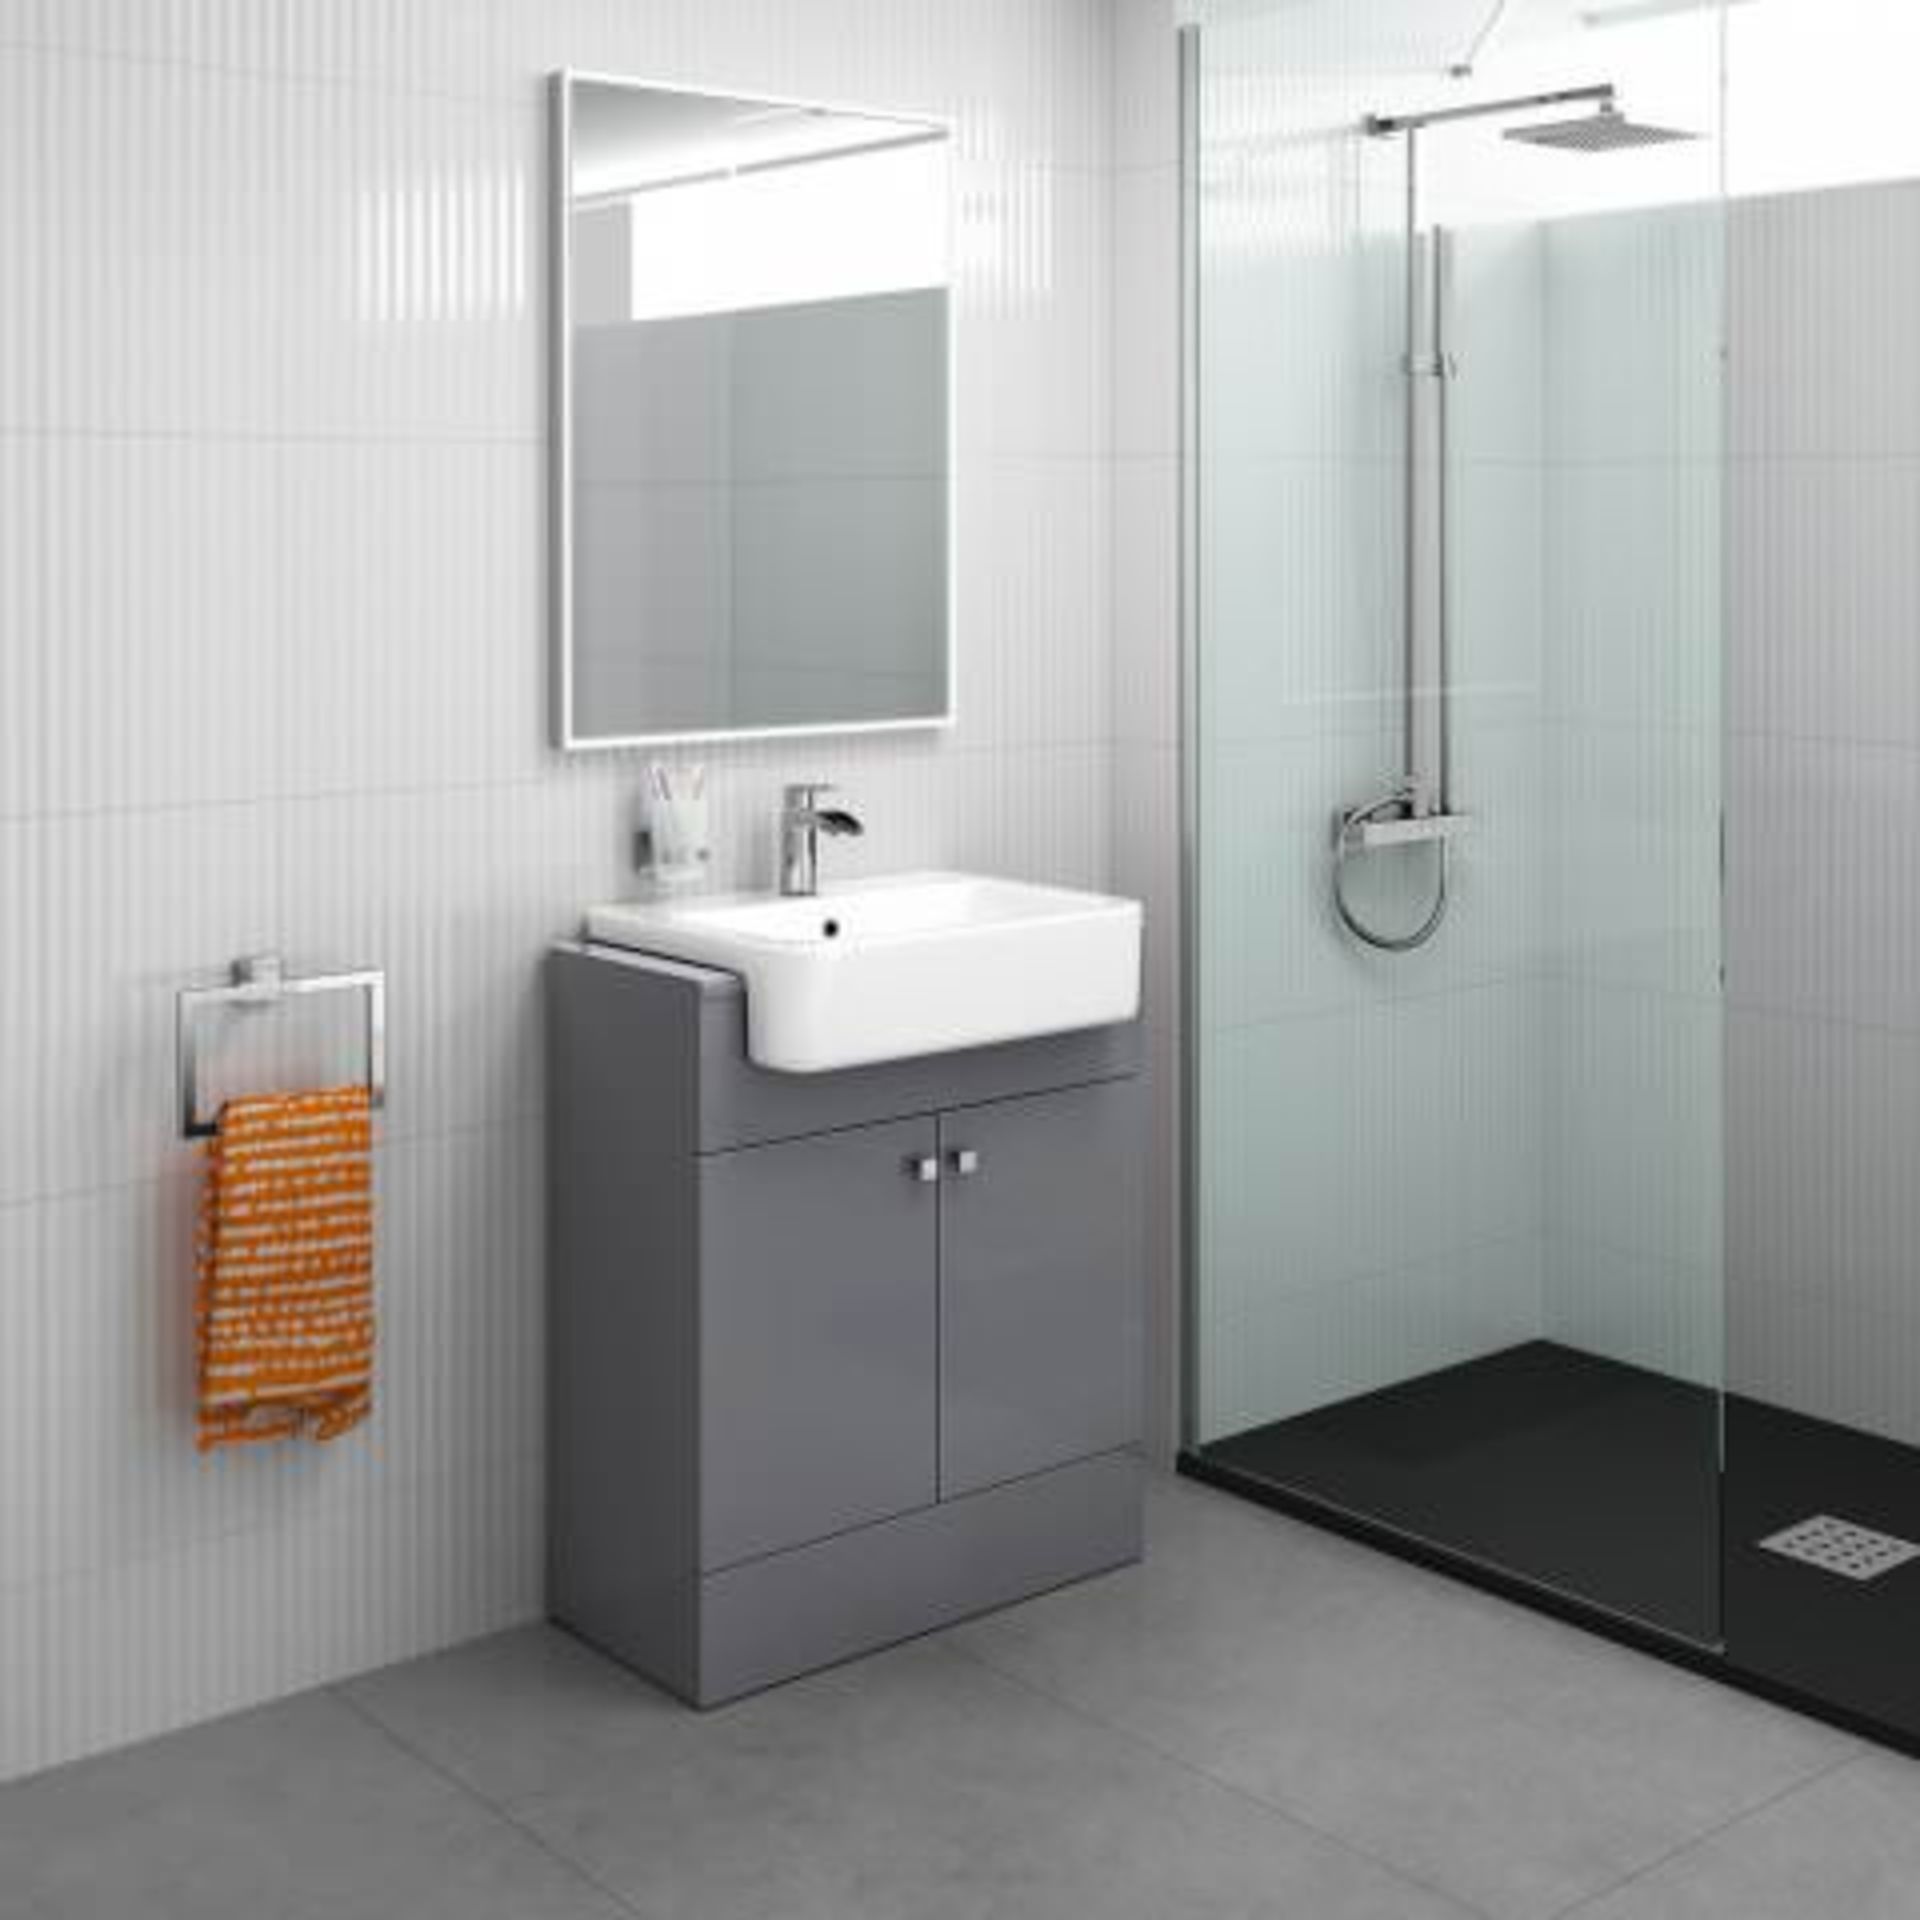 BRAND NEW BOXED 660mm Harper Gloss Grey Basin Vanity Unit - Floor Standing. RRP £749.99.COMES ... - Image 3 of 4